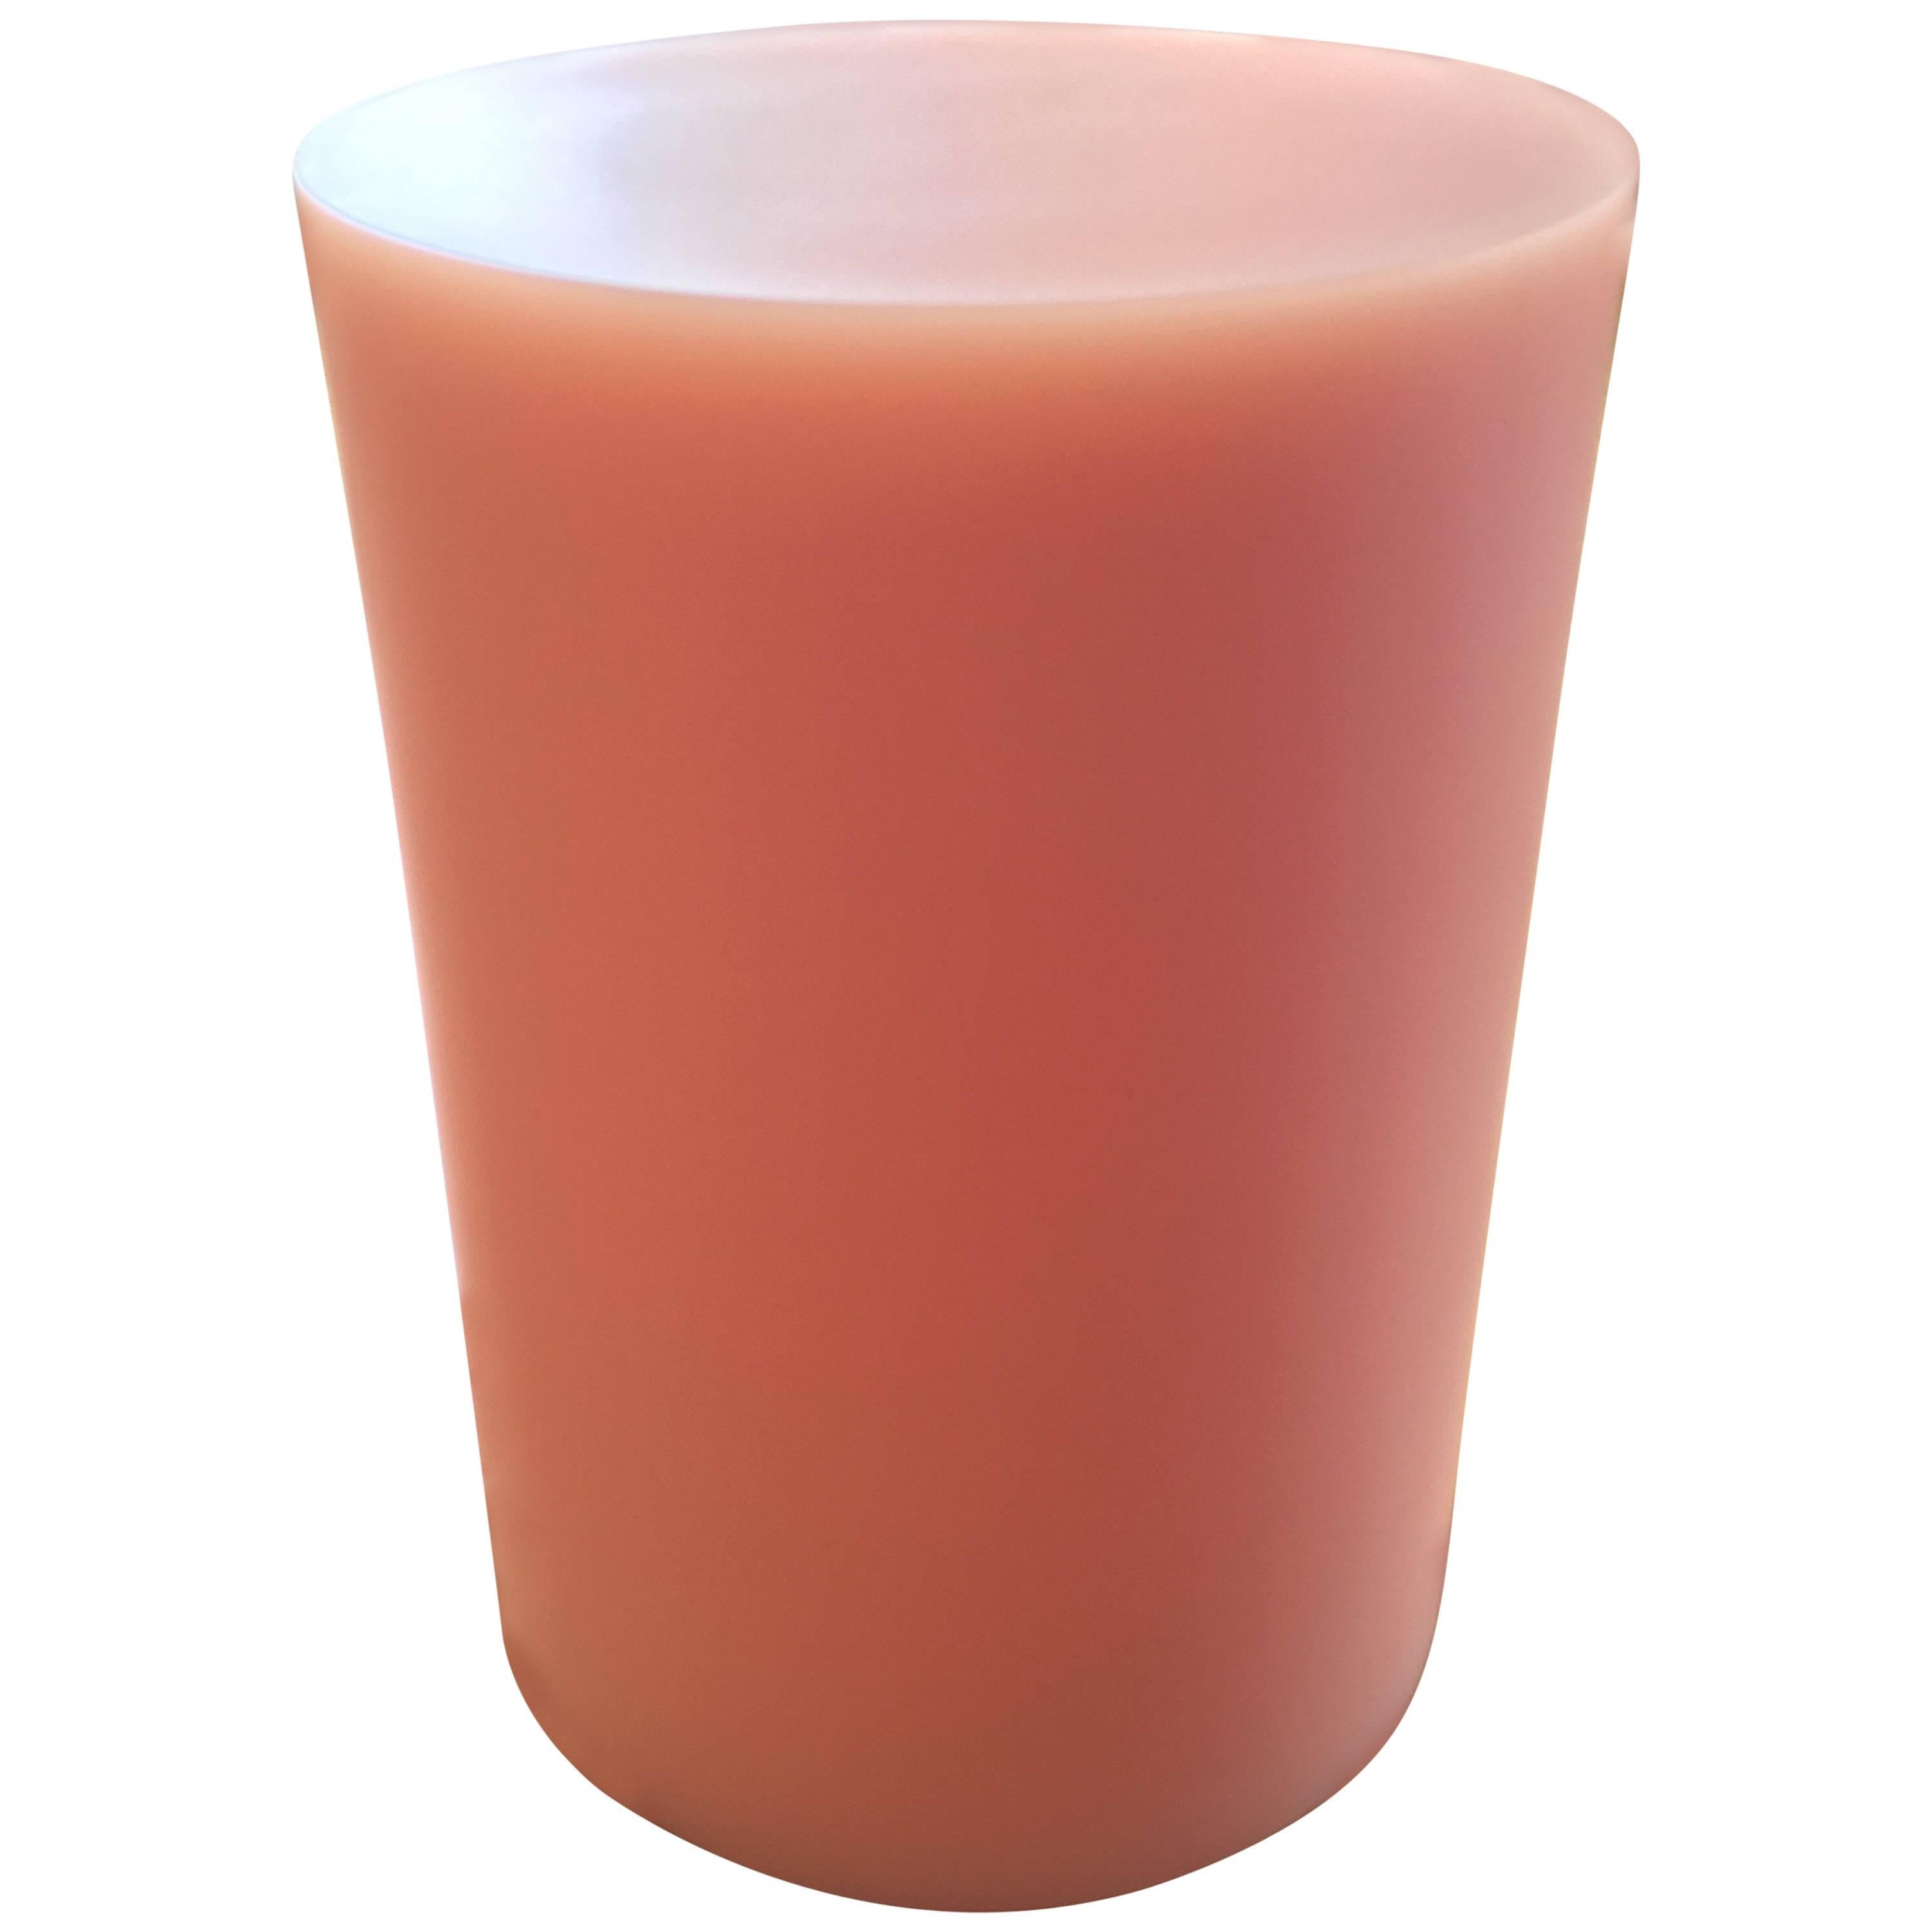 Contemporary Stool or Side Table by Sabine Marcelis, Salmon Pink, 'SOAP Column'